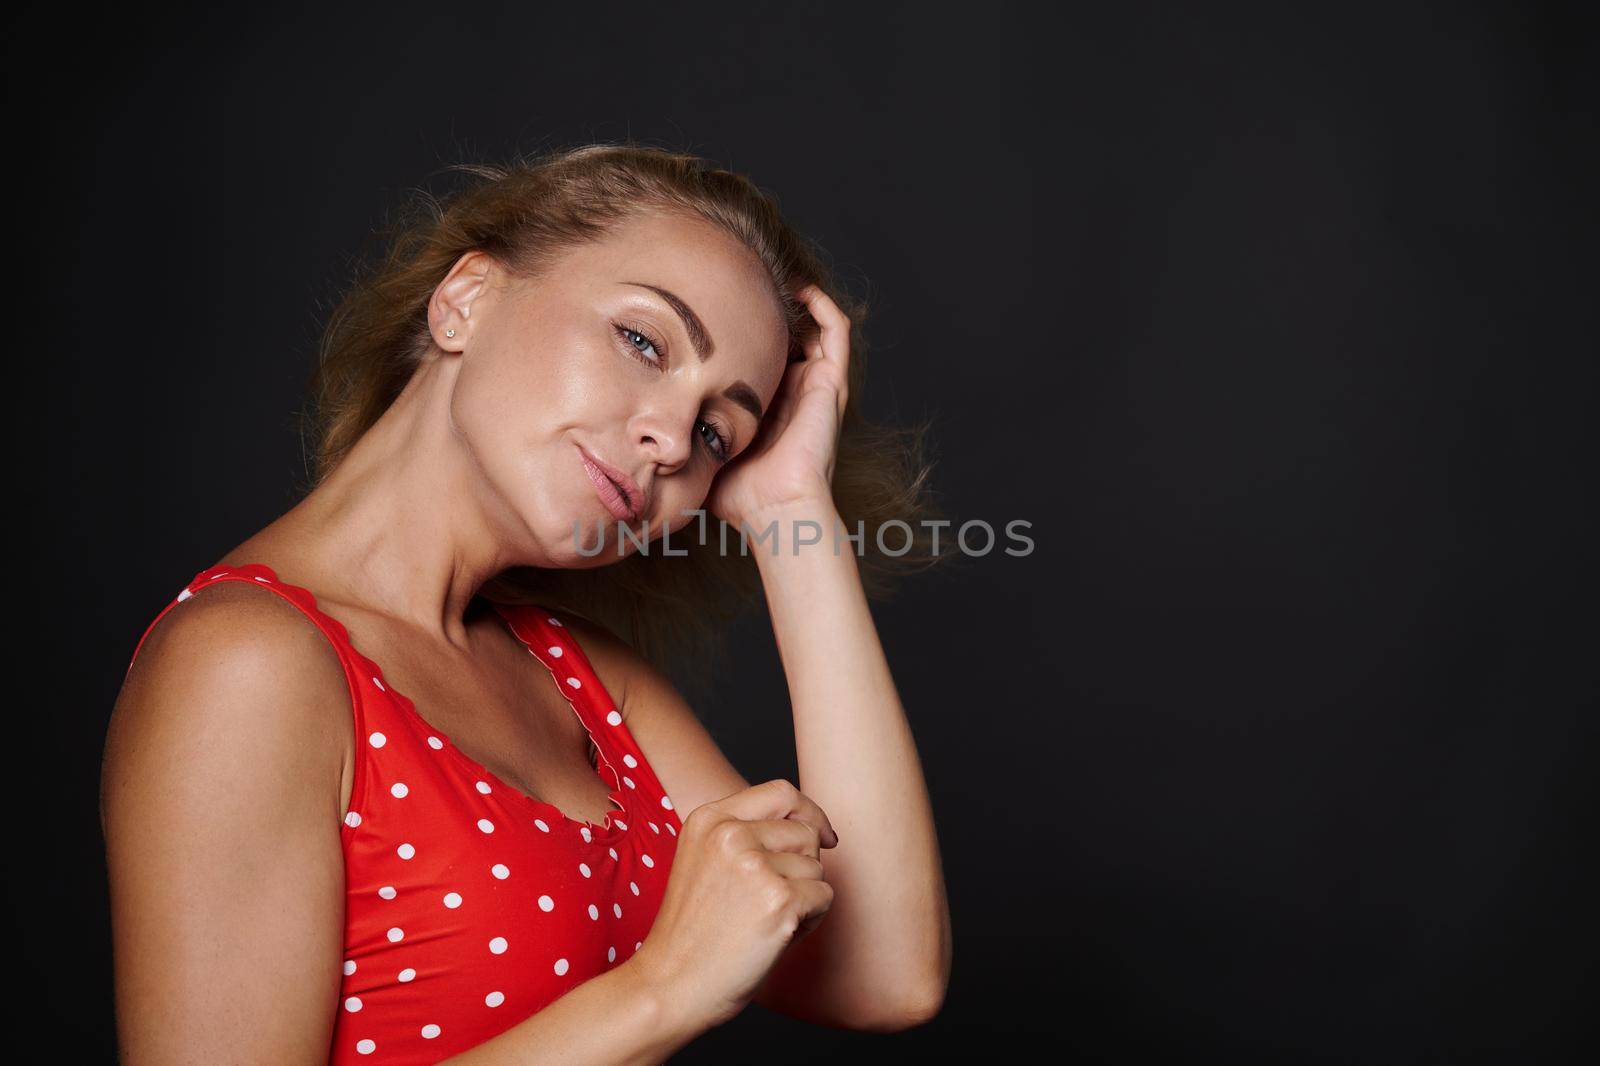 Attractive European woman with healthy clean fresh glowing tanned skin and blond shiny straight hair, natural makeup, wearing red swimsuit with white polka dots isolated on black background by artgf